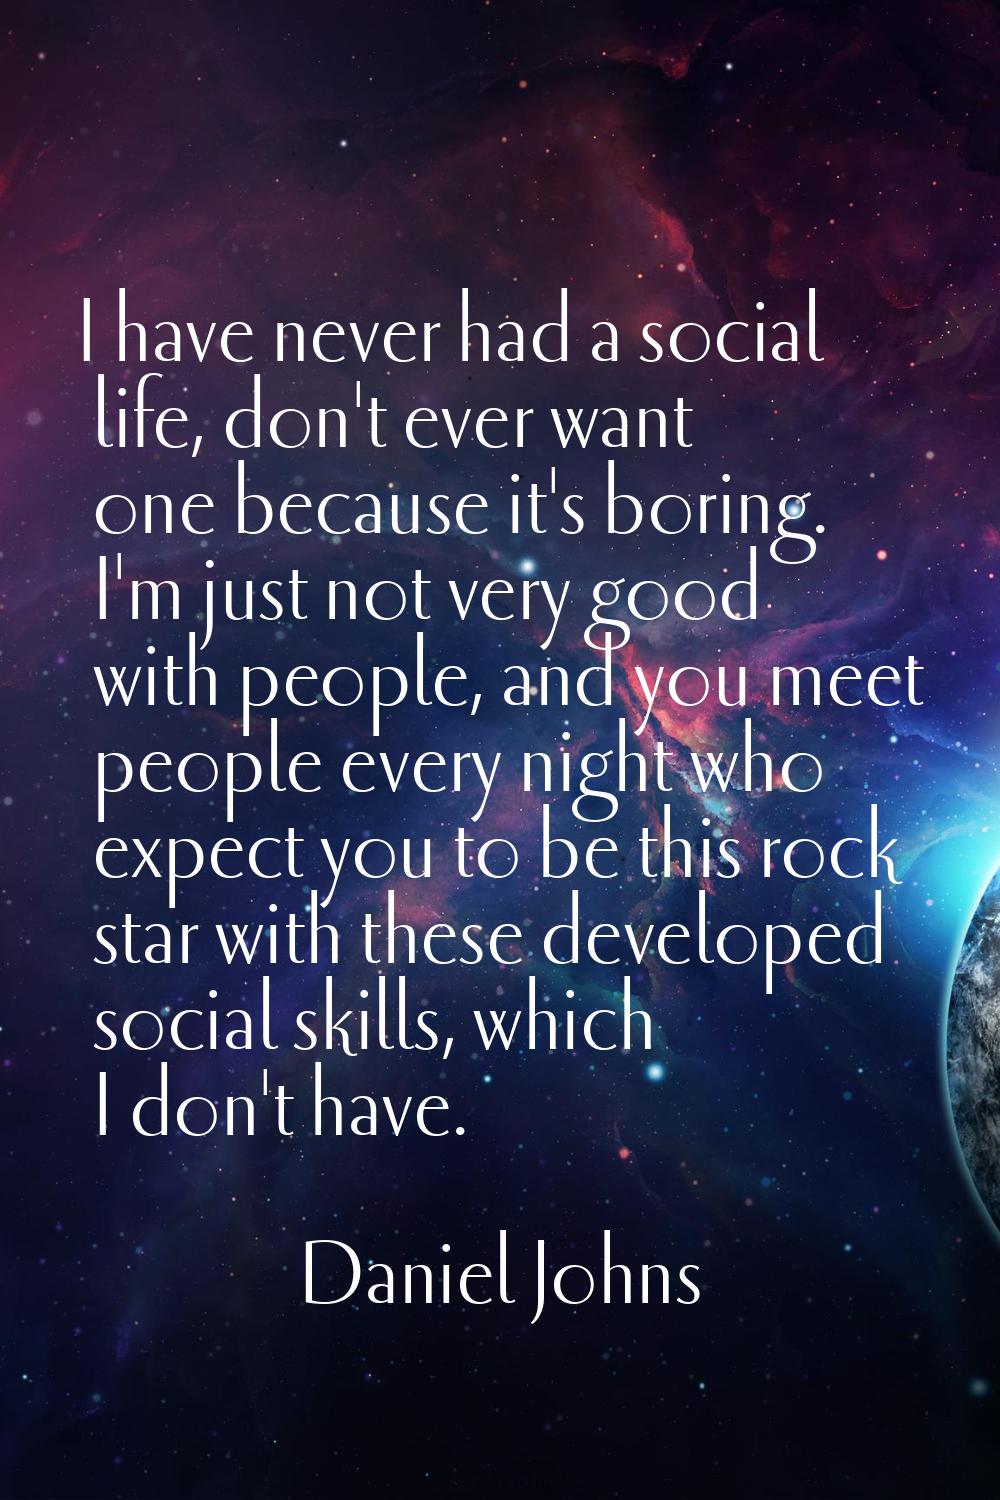 I have never had a social life, don't ever want one because it's boring. I'm just not very good wit